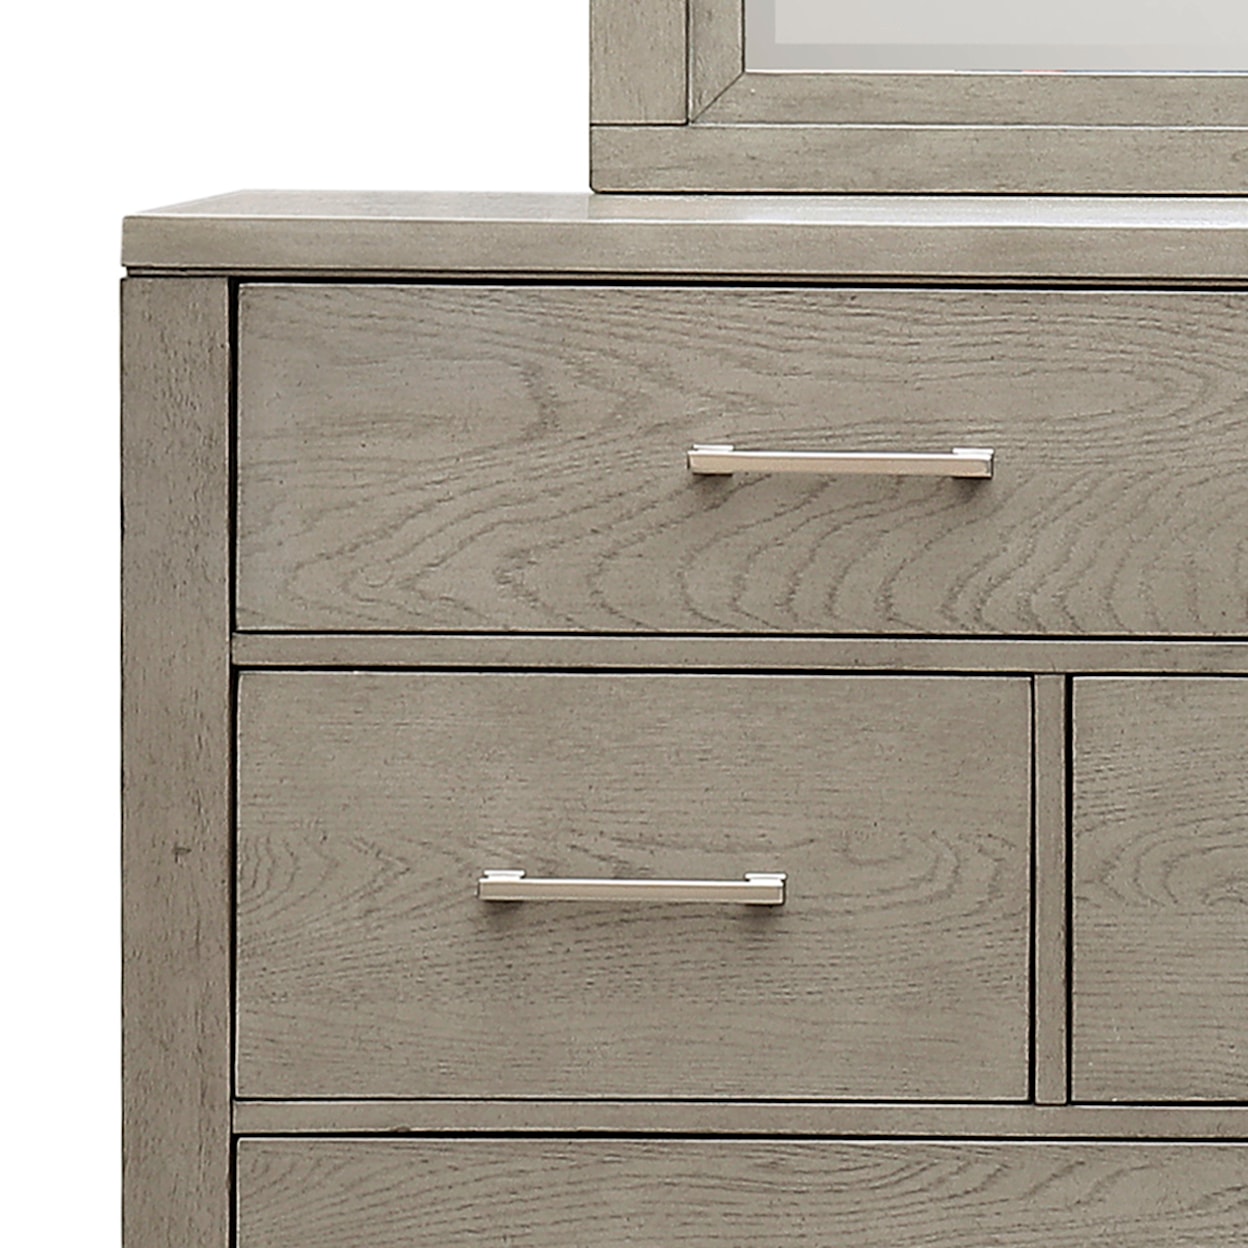 Samuel Lawrence Essex by Drew and Jonathan Home Essex Dresser